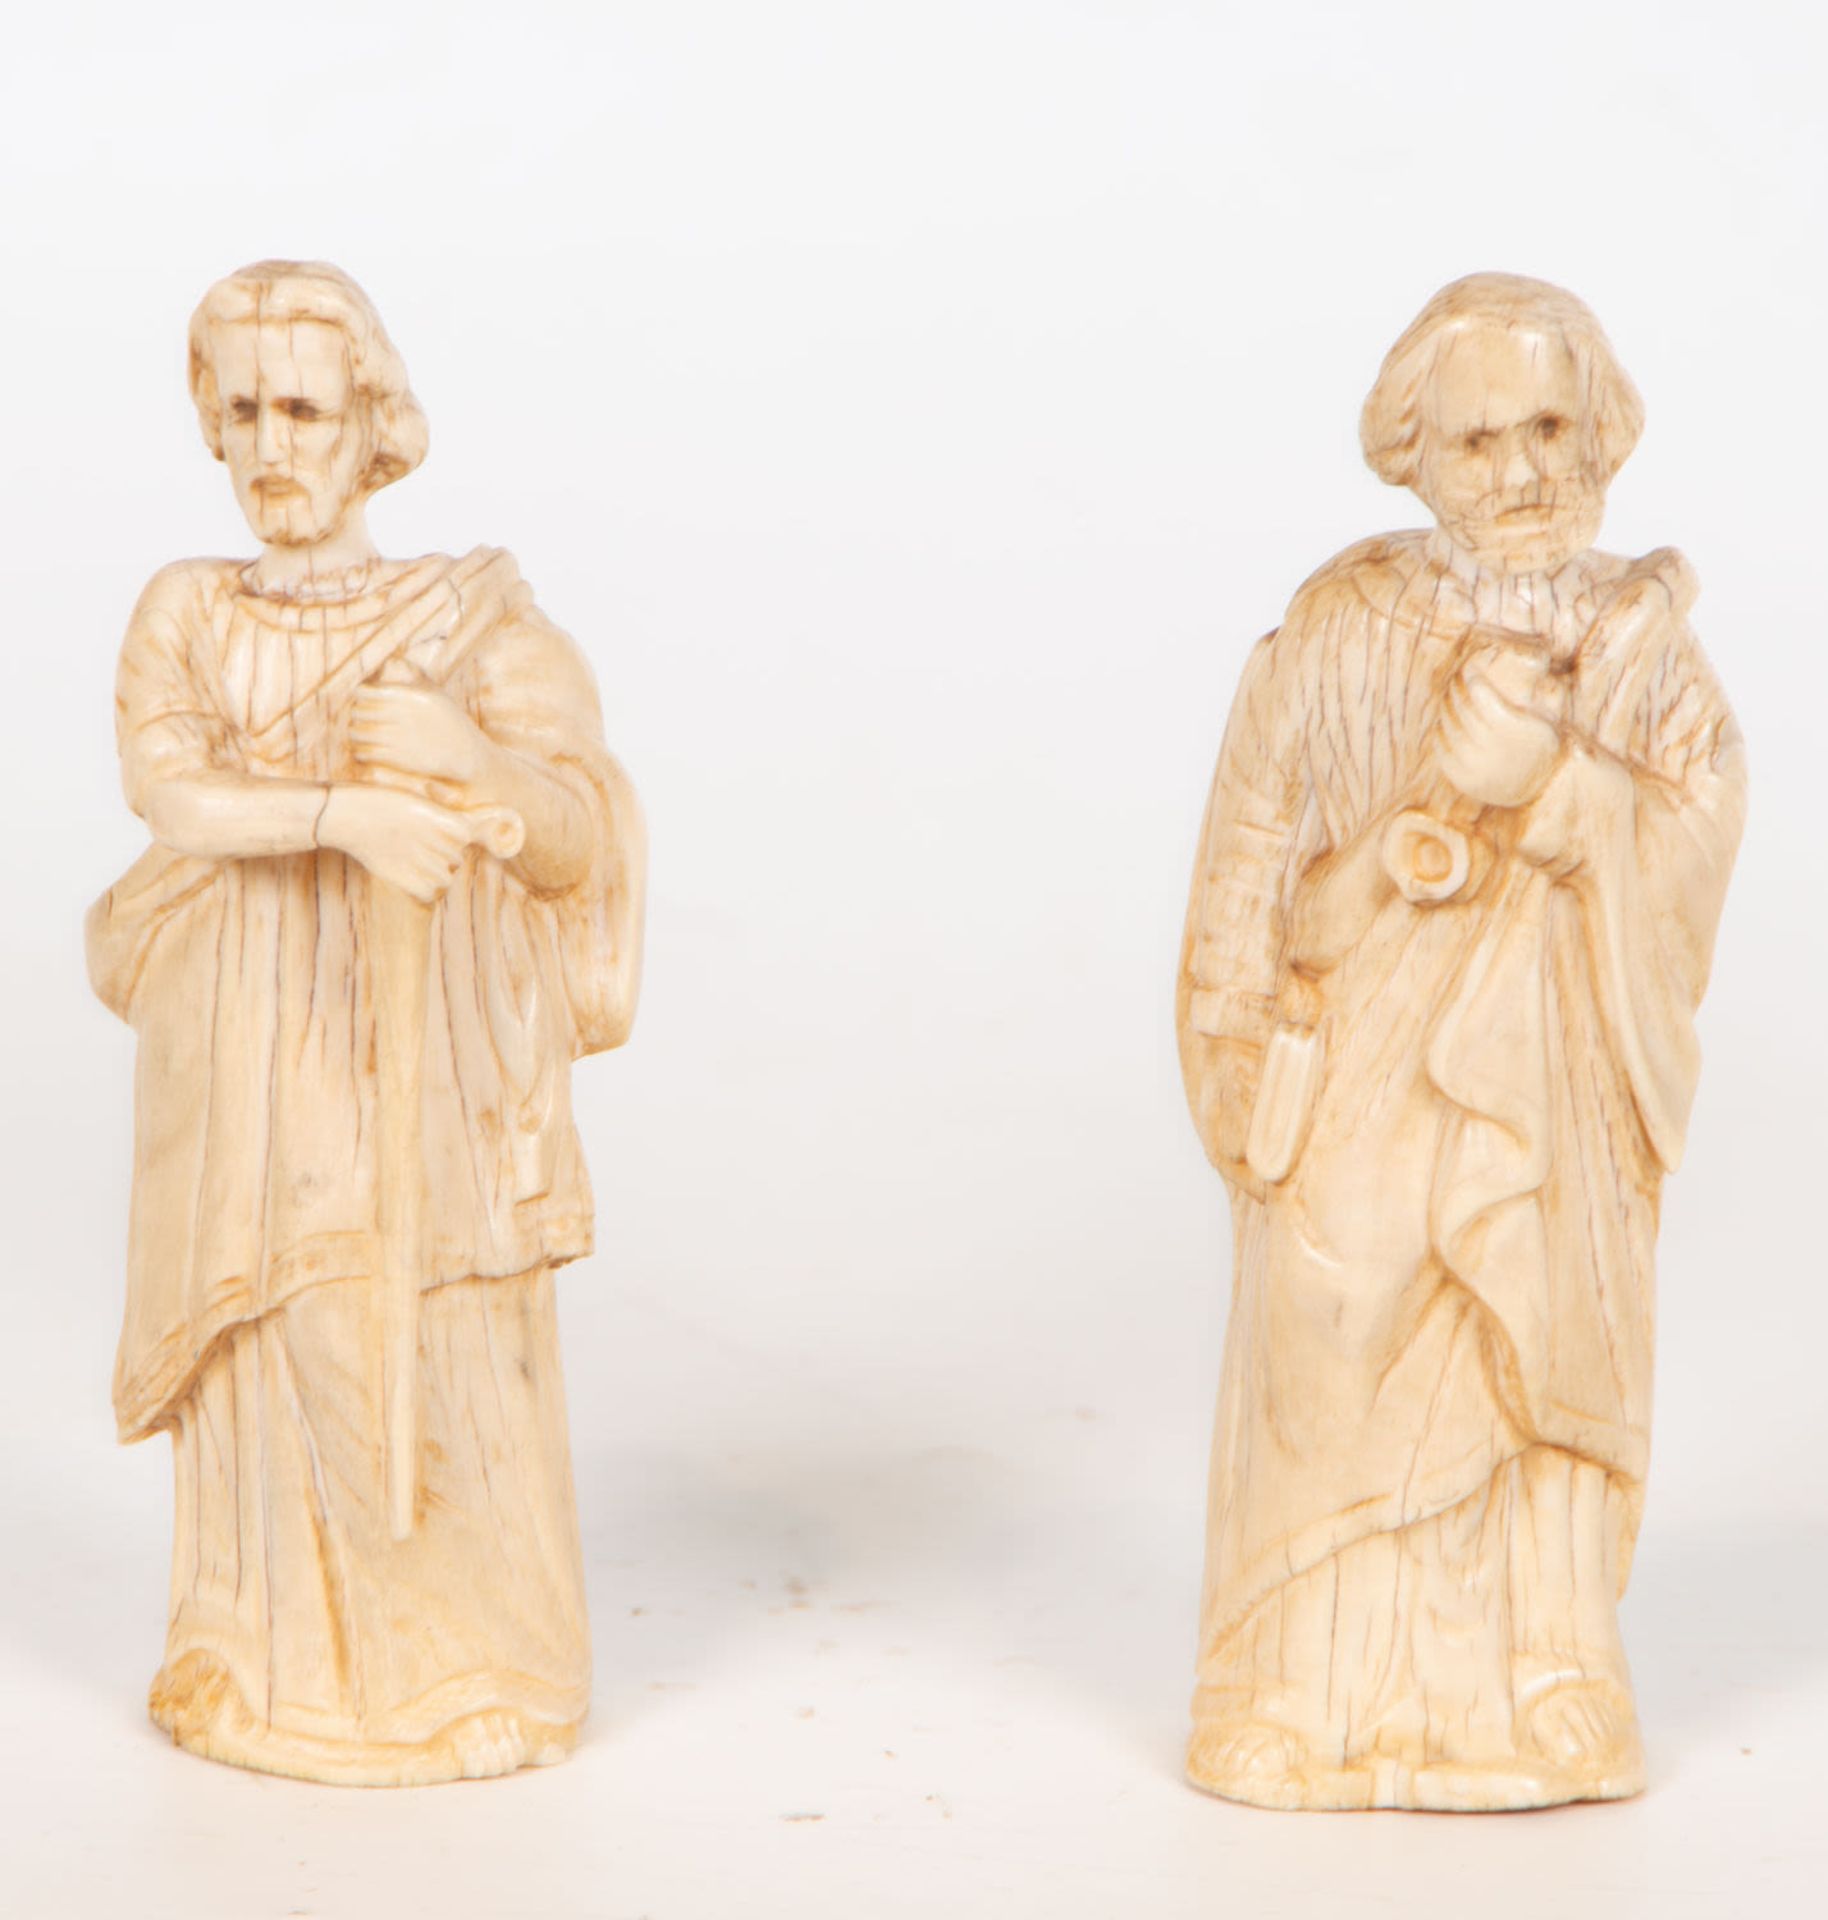 Saint Peter and Saint Paul in Ivory, Central European School, 17th century